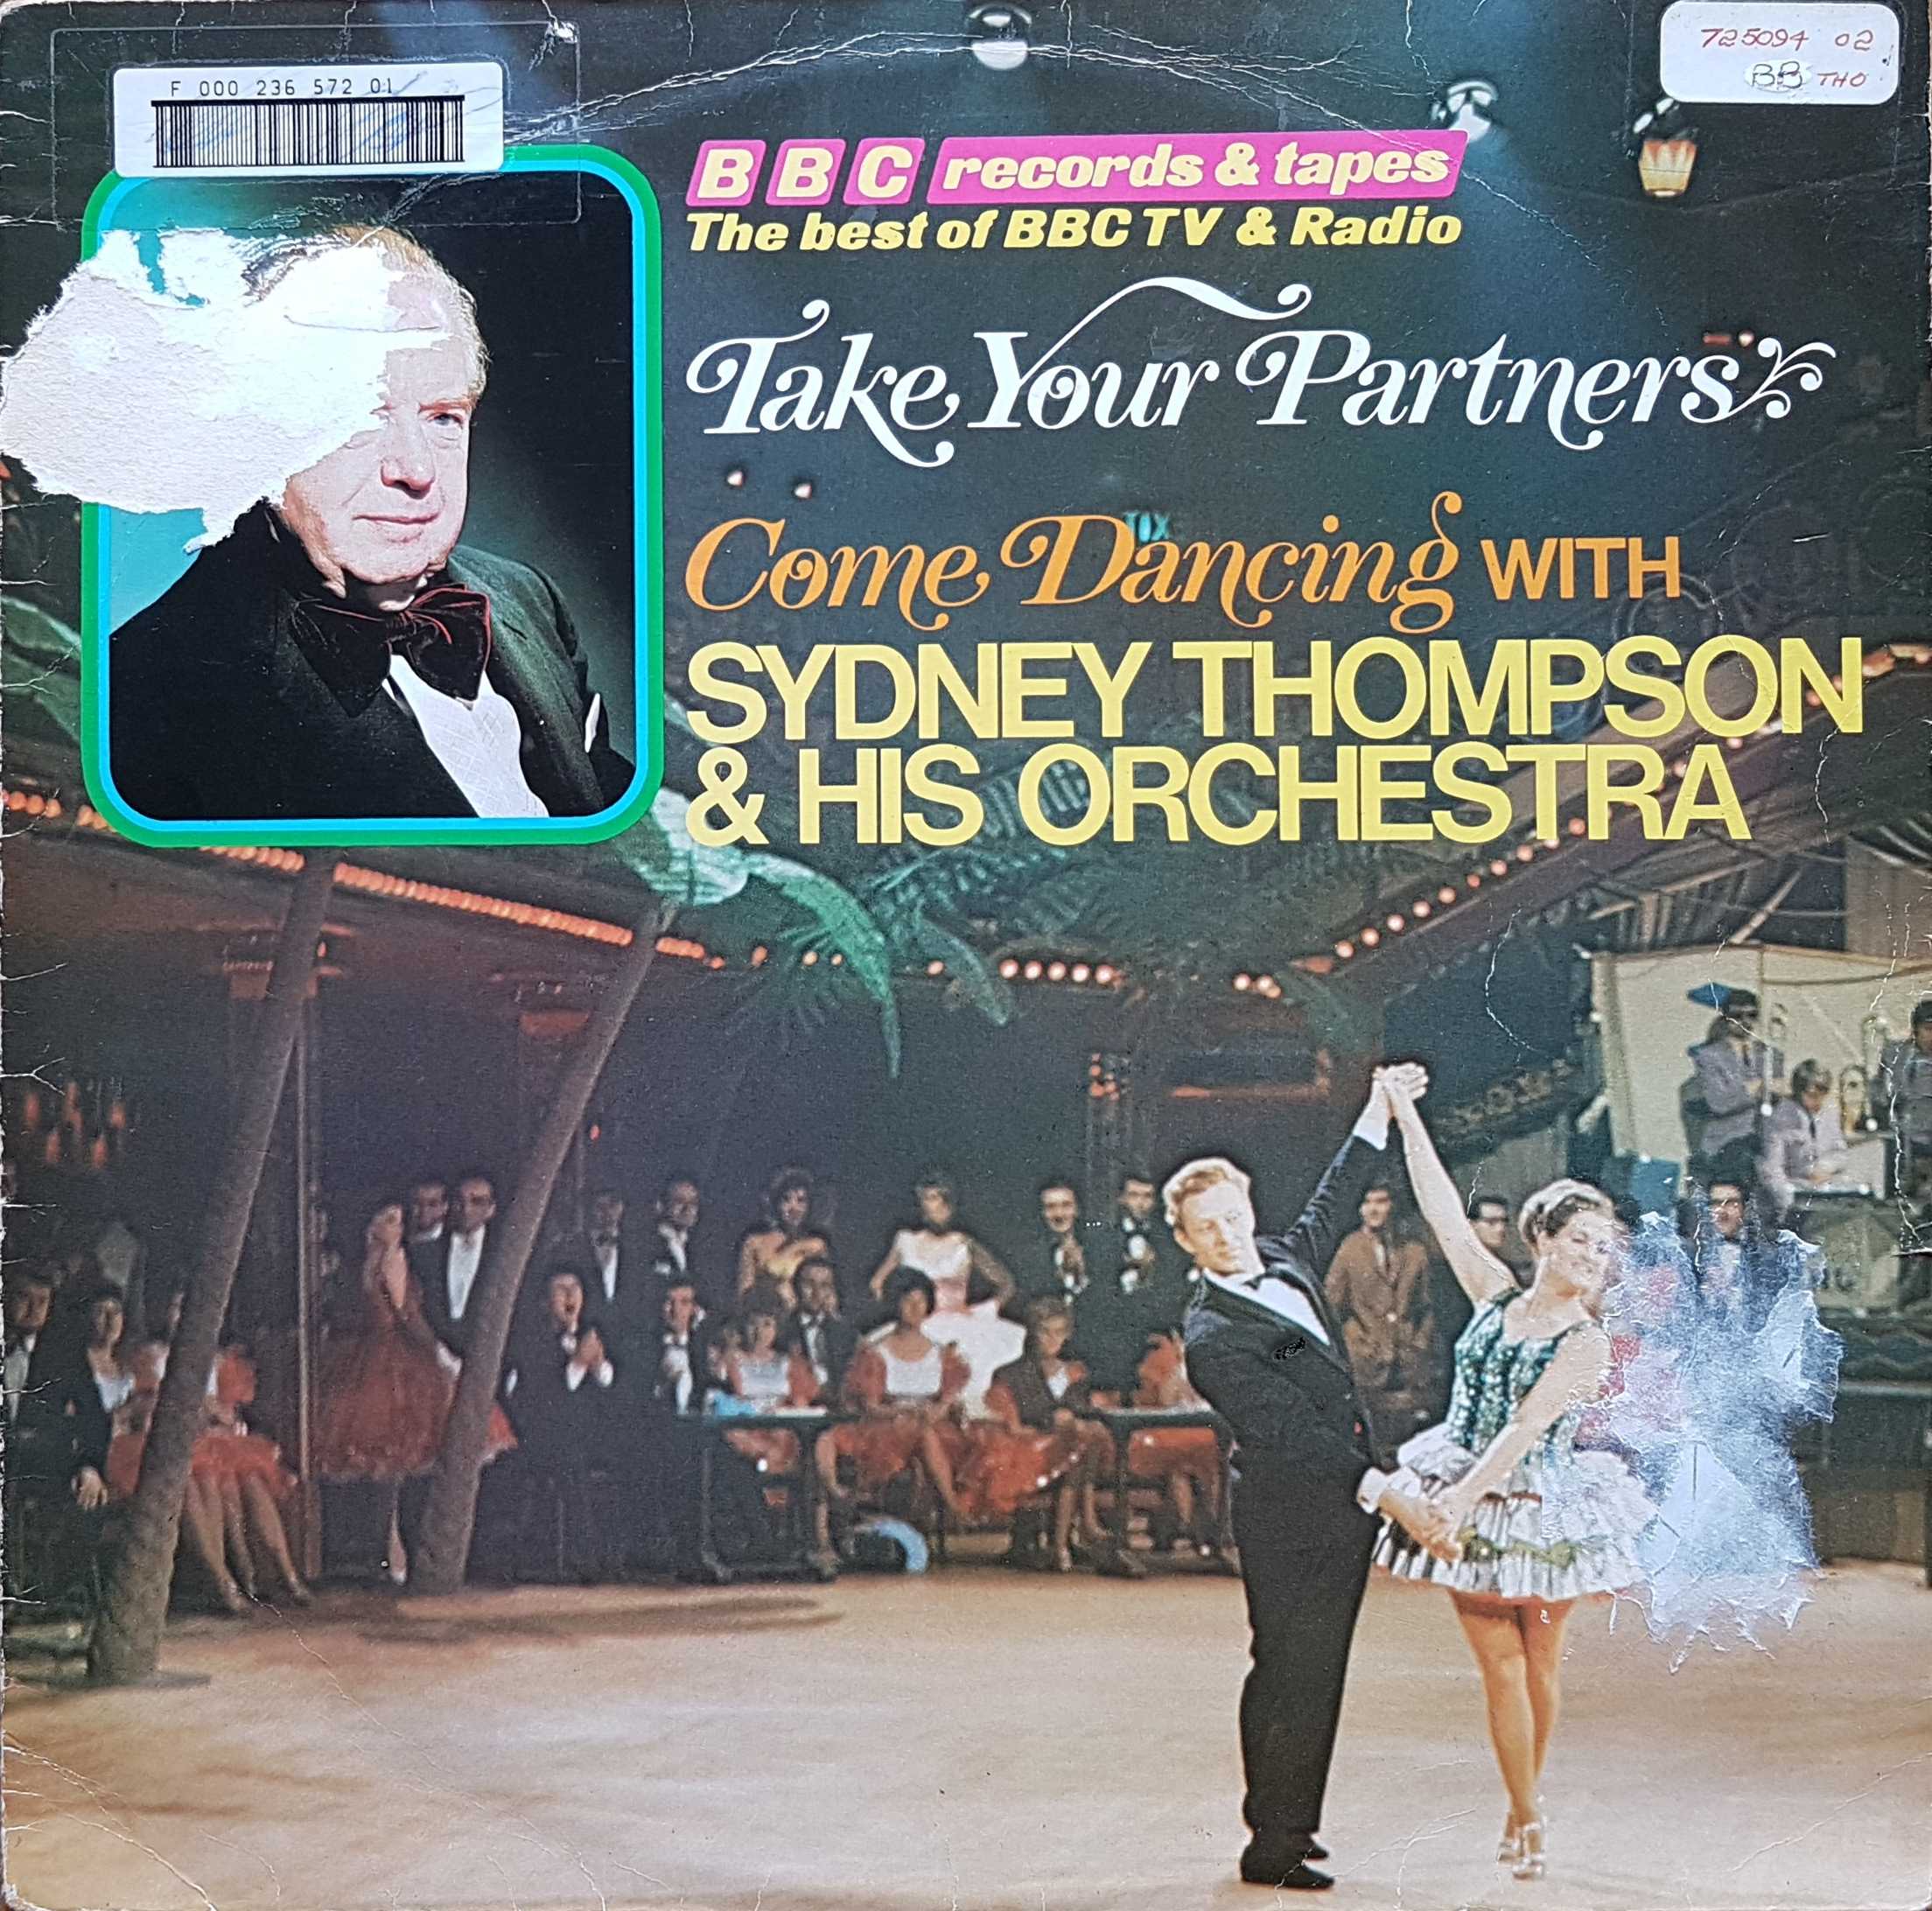 Picture of REB 216 Take your partners (Come dancing) by artist Sydney Thompson and his Orchestra from the BBC albums - Records and Tapes library